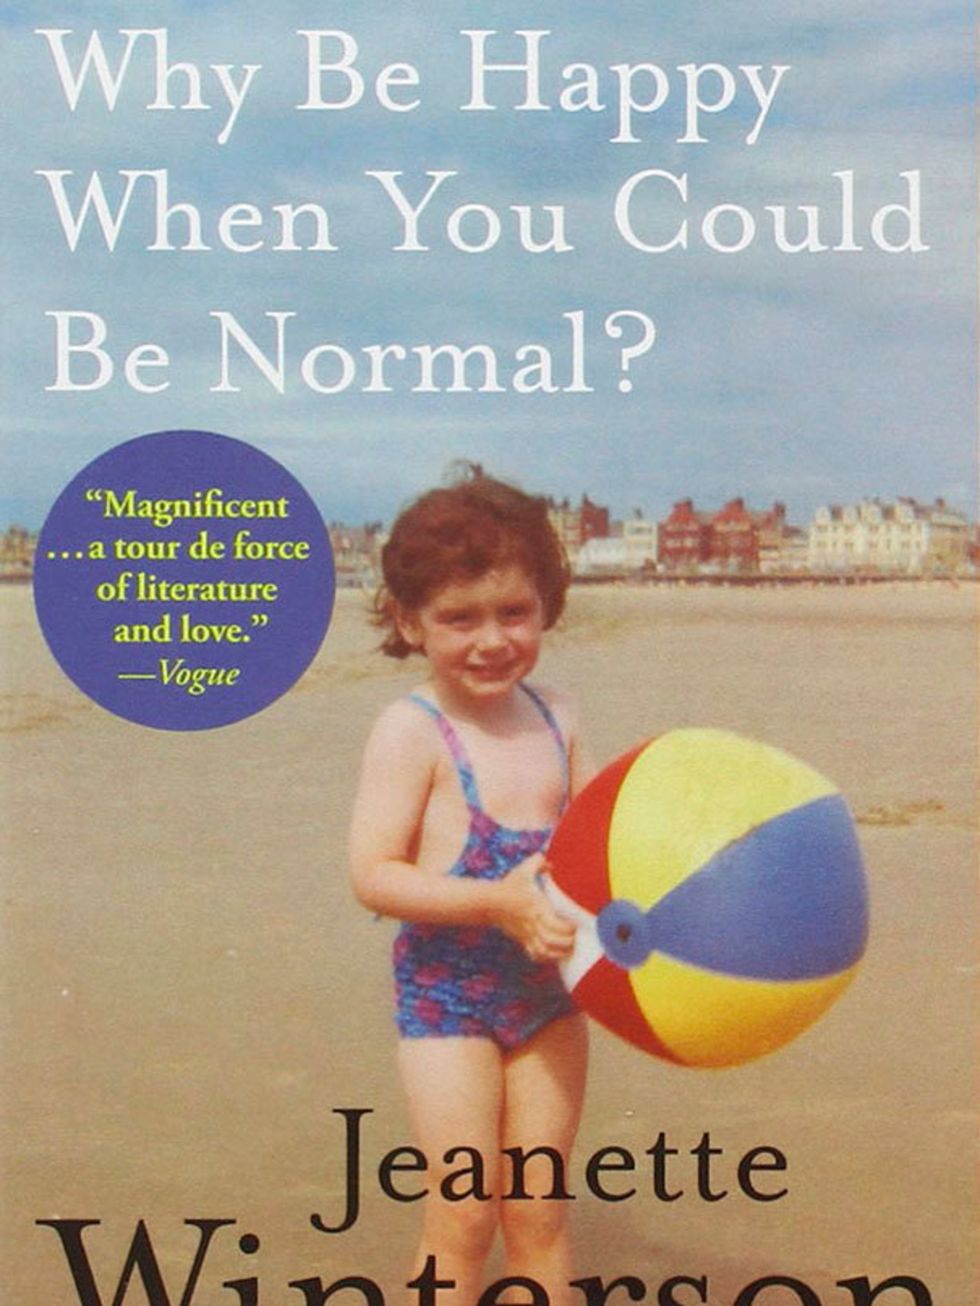 <p>Why Be Happy When You Could Be Normal? by Jeanette Winterson</p>

<p>Winterson has said that her first, semi-autobiographical book Oranges Are Not the Only Fruit was the story she wrote about her childhood that she could survive, and that this memoir, 